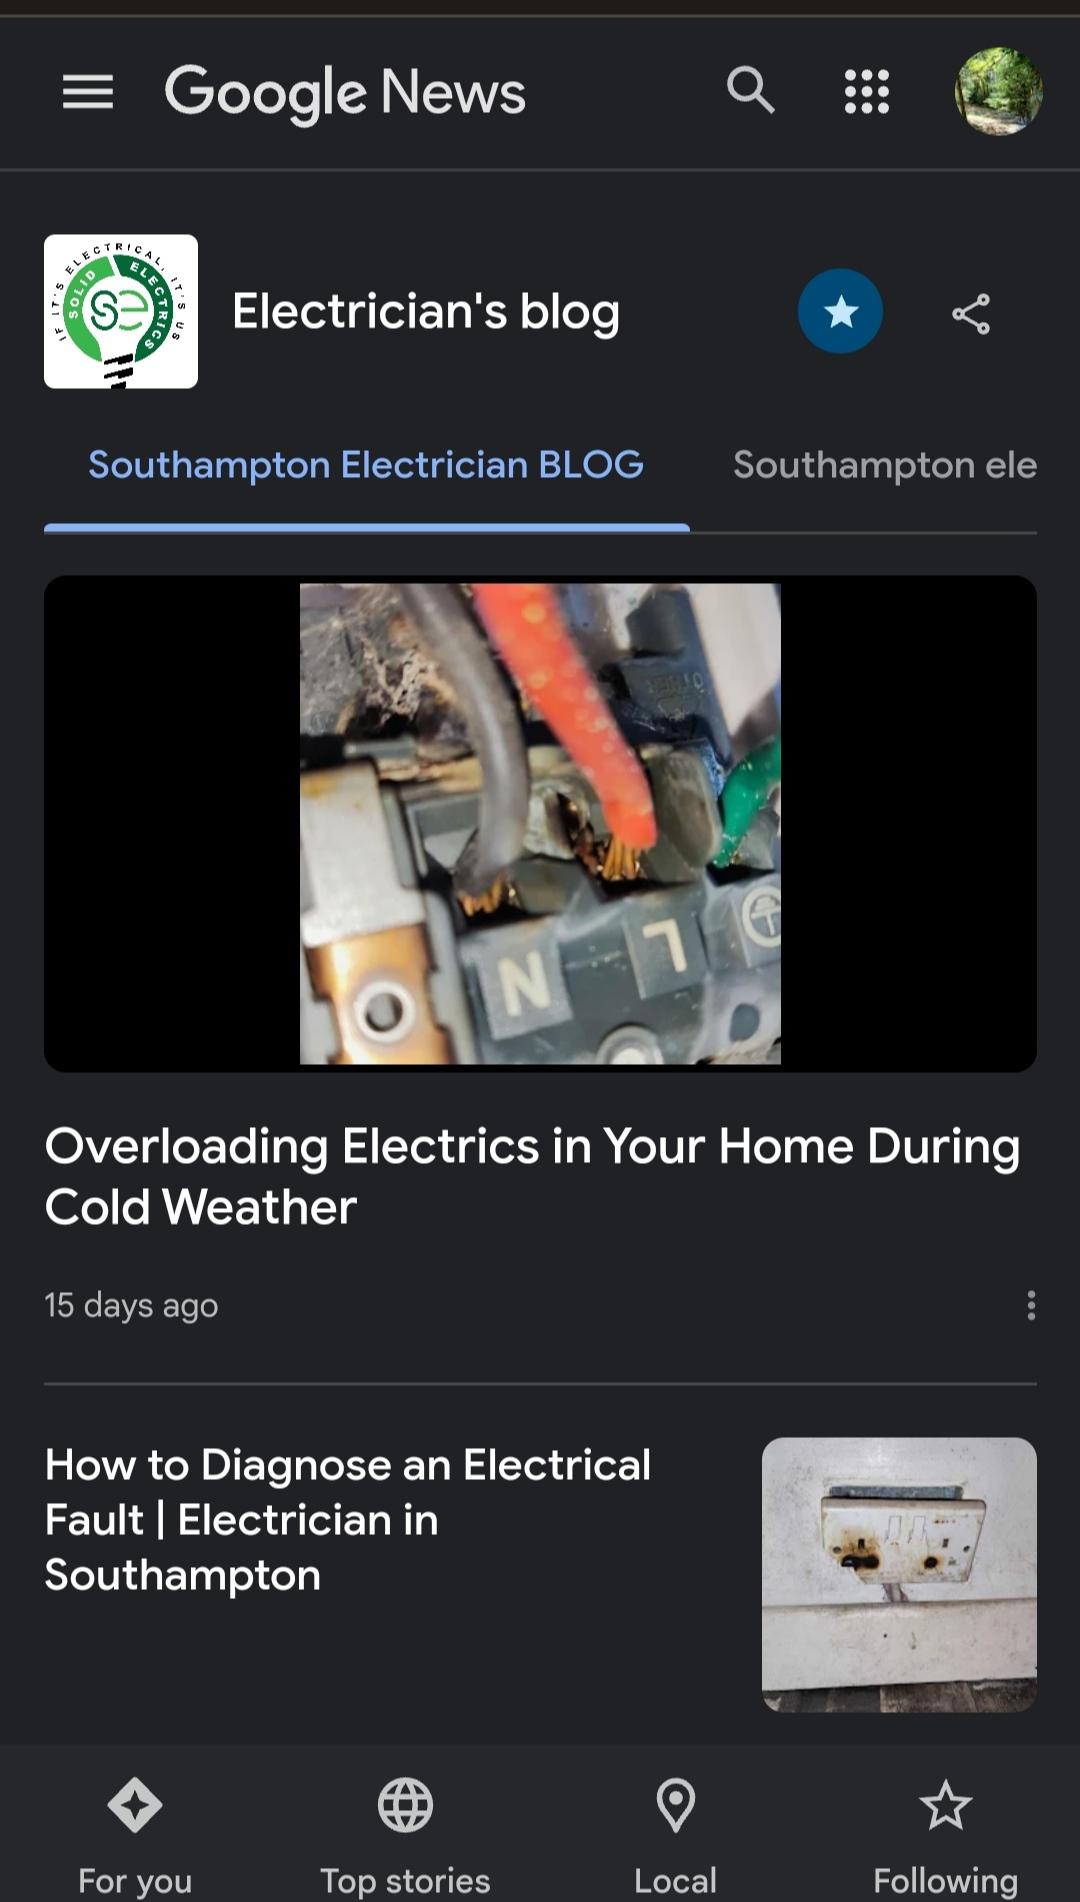 Local Electrician from Southampton Google news